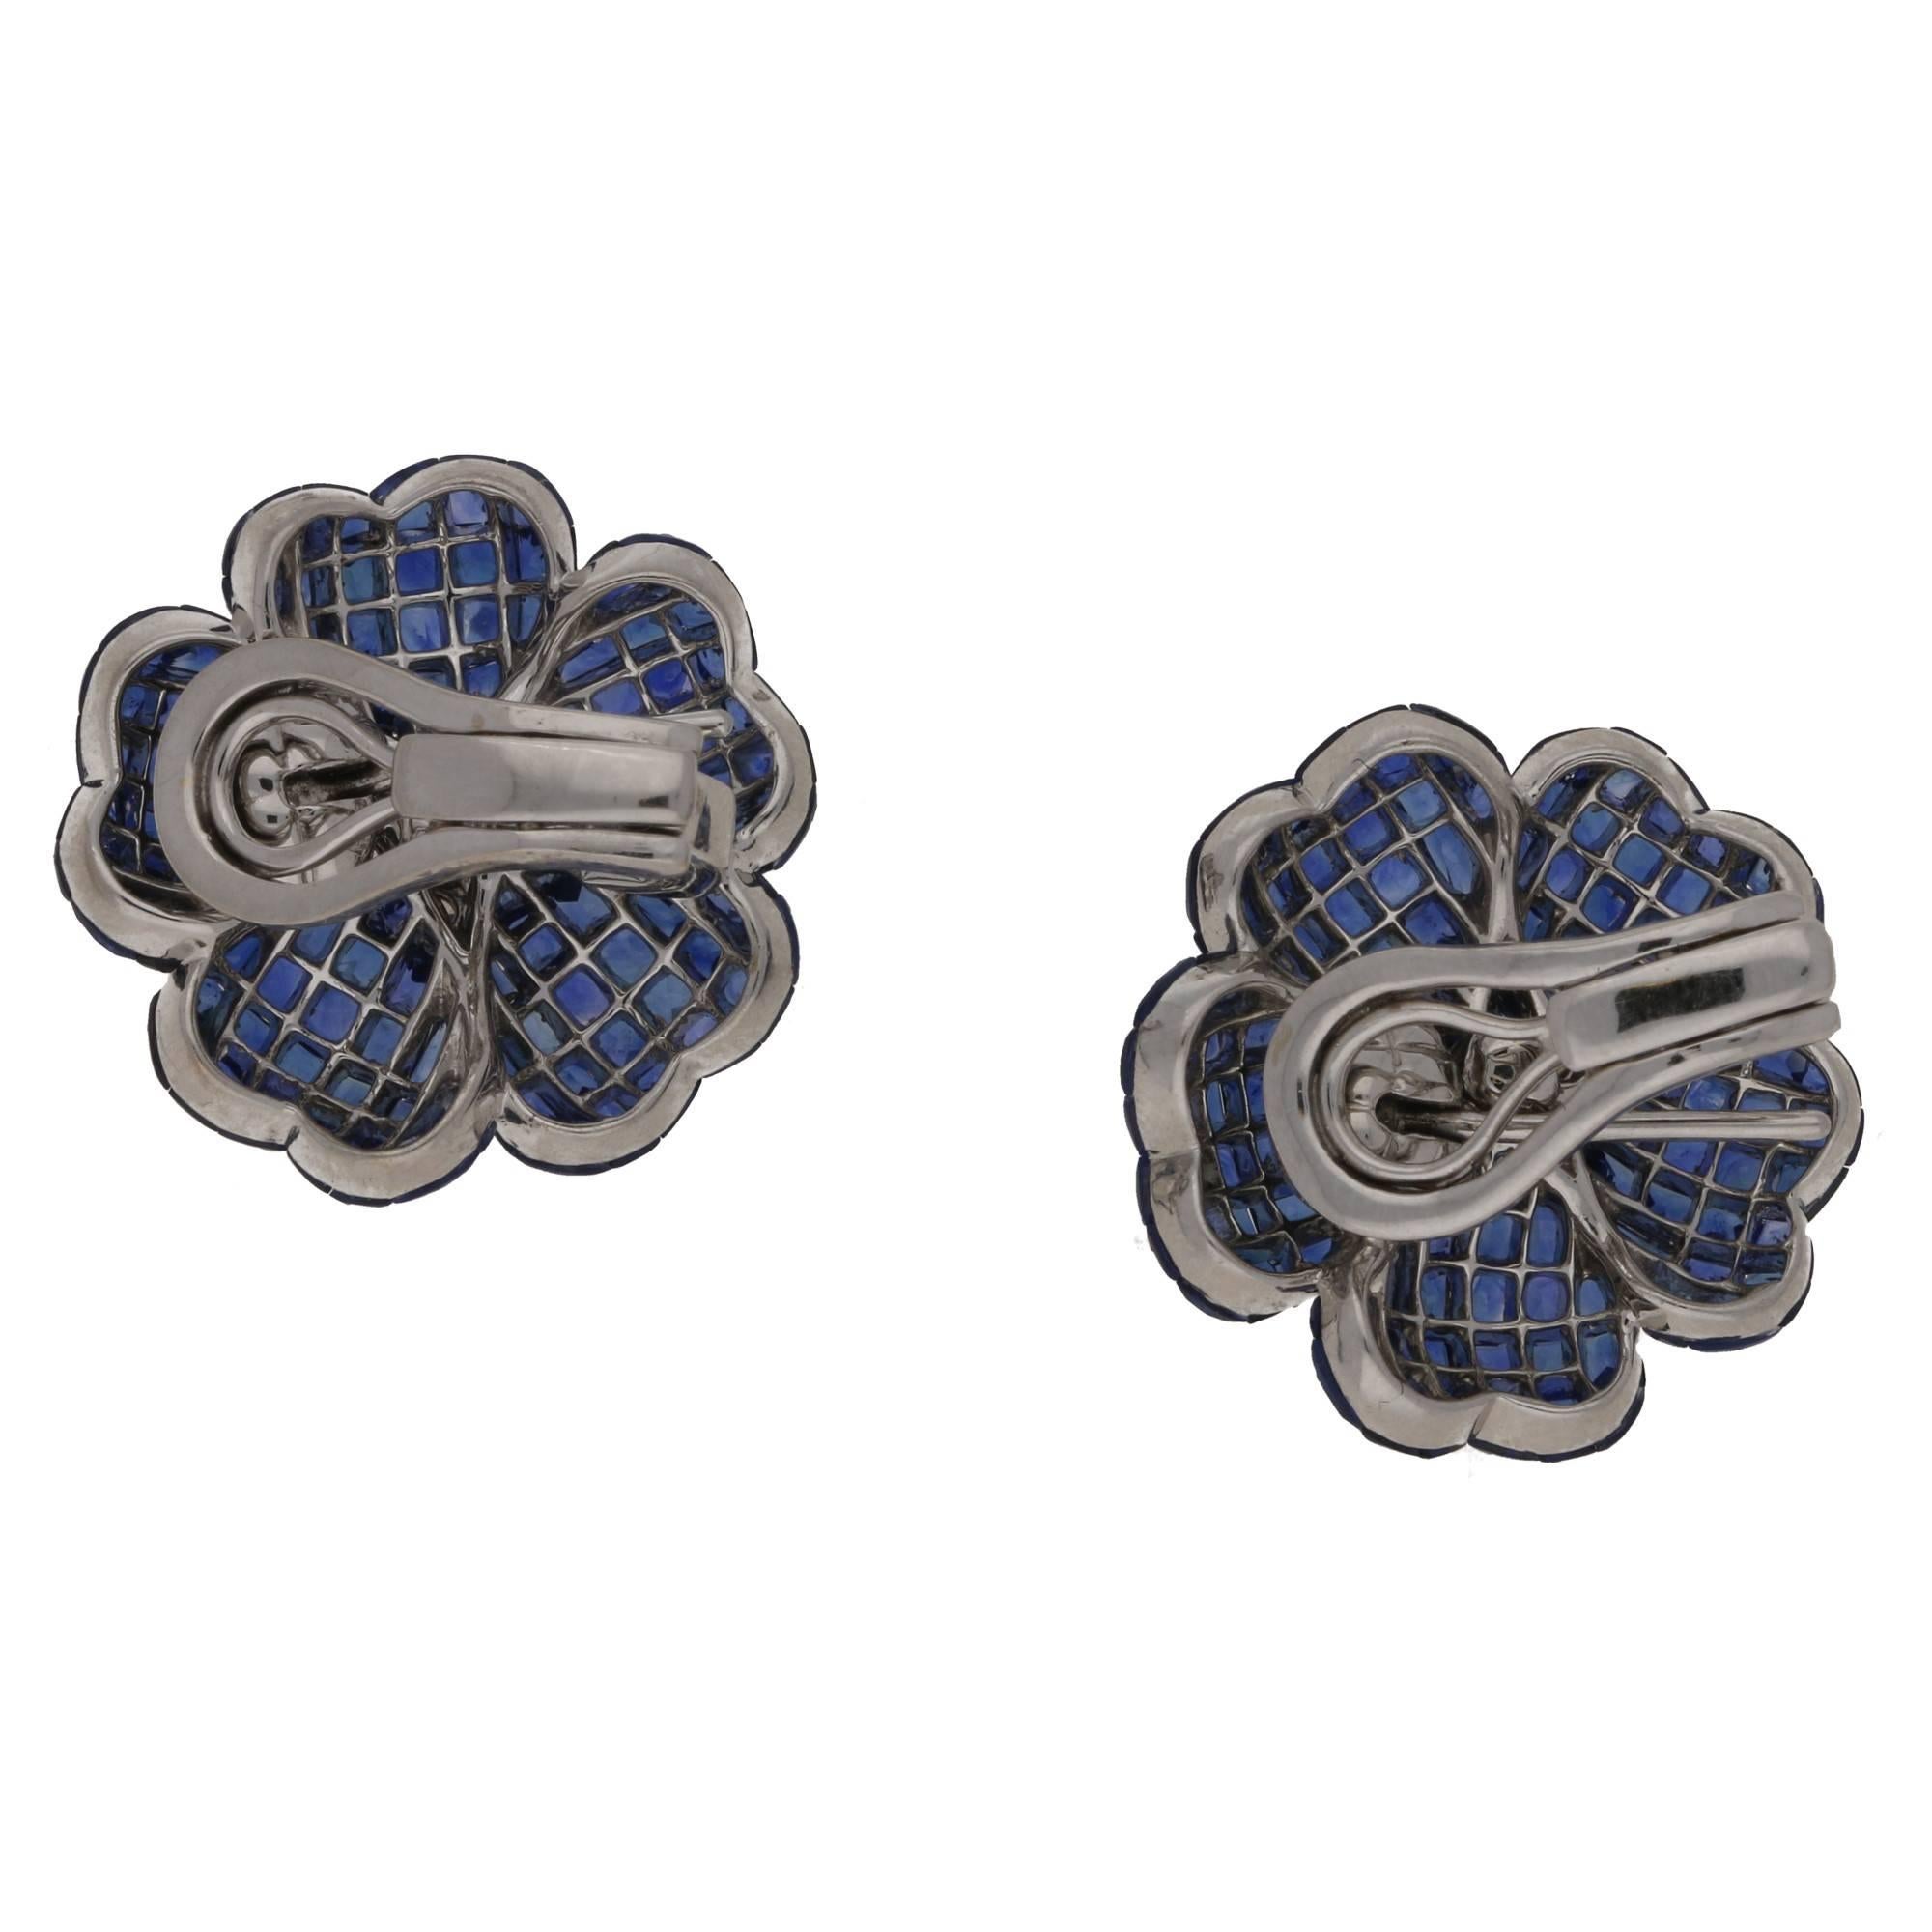 An exquisite pair of invisibly set sapphire and diamond flower earrings. With calibre cut sapphires adorning the softly undulating petals, centered with round brilliant cut diamonds claw set. Set with fold-able post and sprung clip fittings.